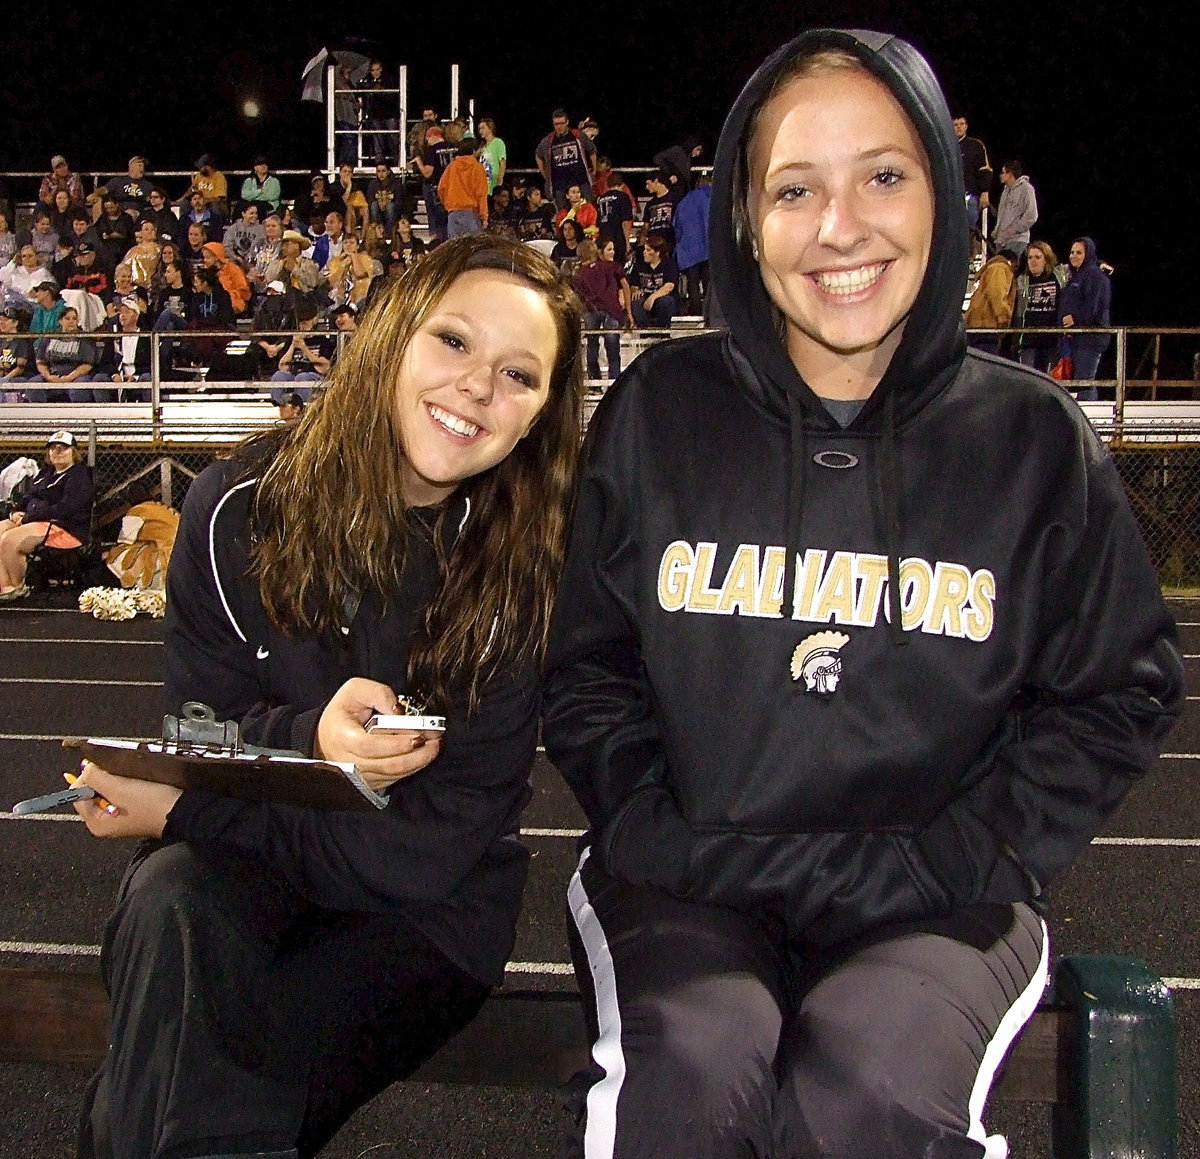 Image: There they are! Stat Squad girls Bailey Eubank and Jaclynn Lewis stay warm while staying on top of the game stats.